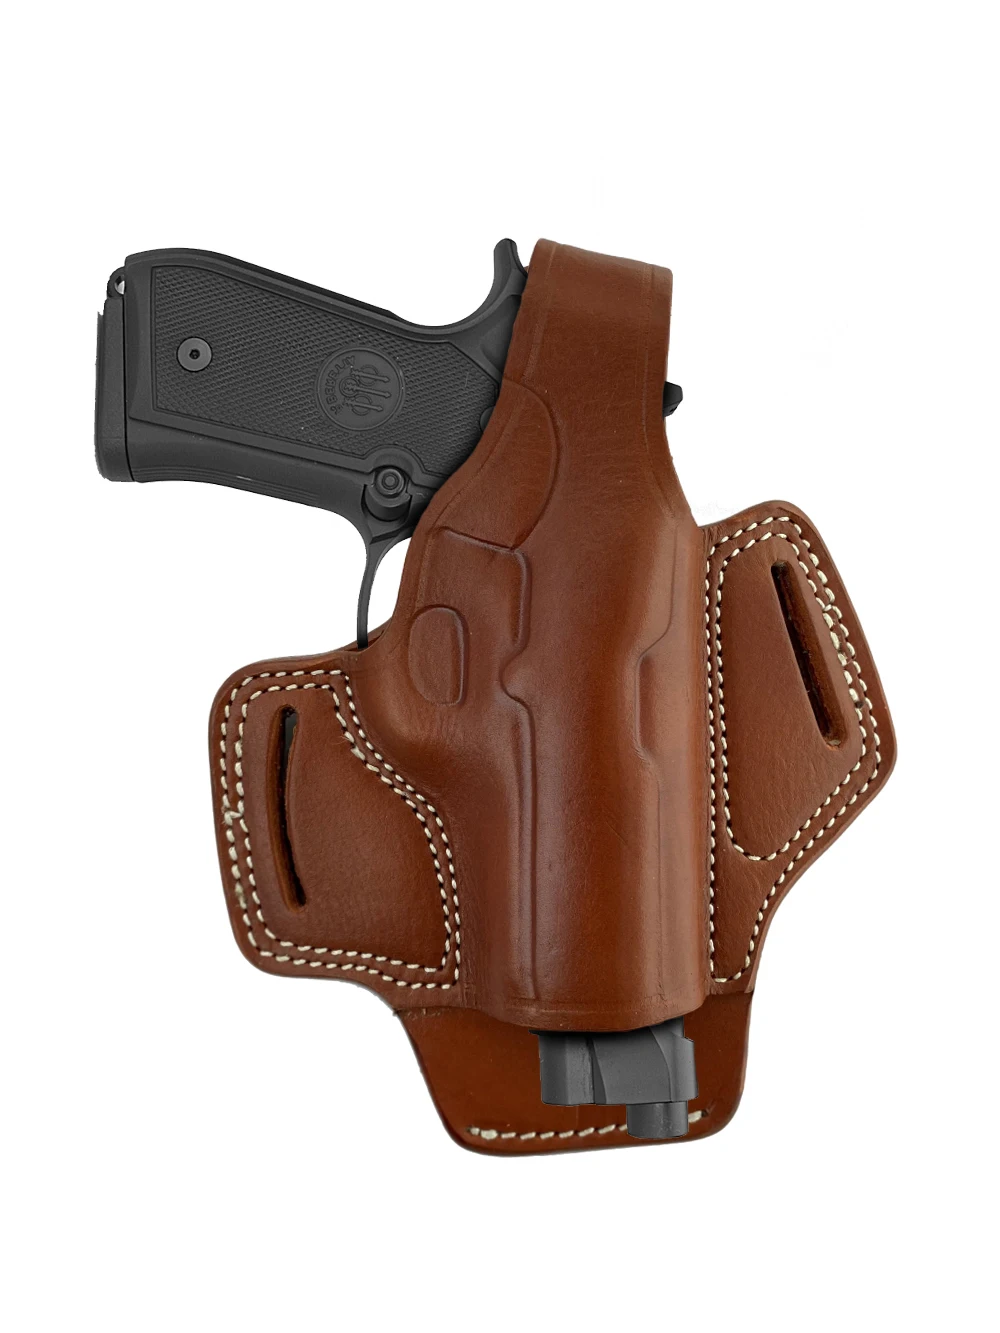 Leather Gun Holster For Beretta 92 92F 92FS Protected Barrel Owb Carry Two Slot Thumb Break Handmade Pistol Pouch Accessory